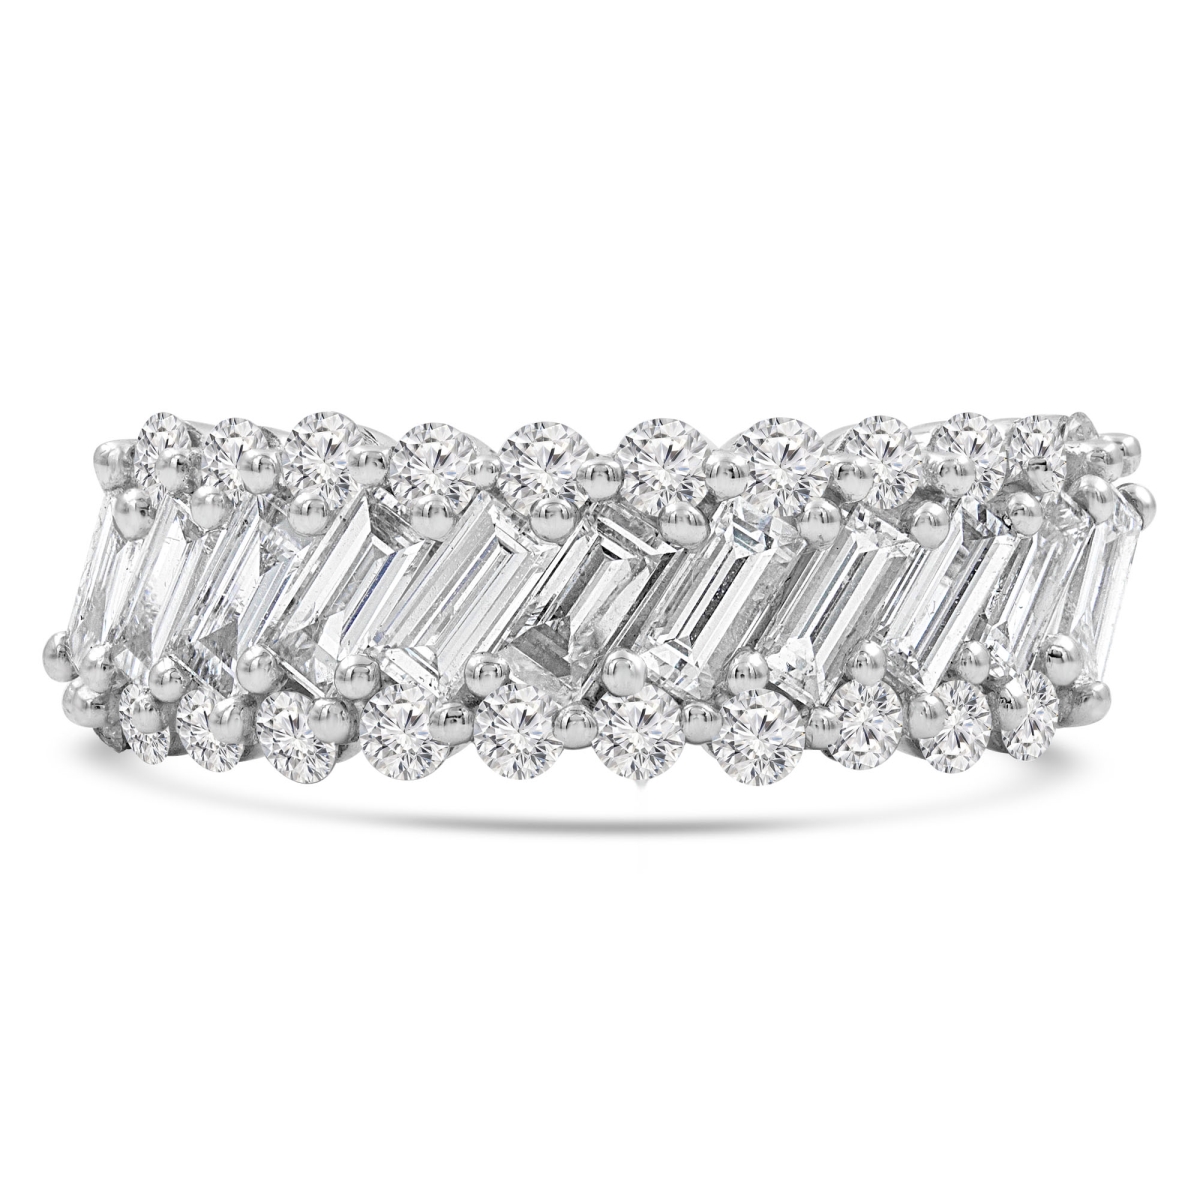 Picture of Majesty Diamonds MD210236-9 1.6 CTW Baguette Diamond Three-Row Cocktail Anniversary Band Ring in 18K White Gold - Size 9